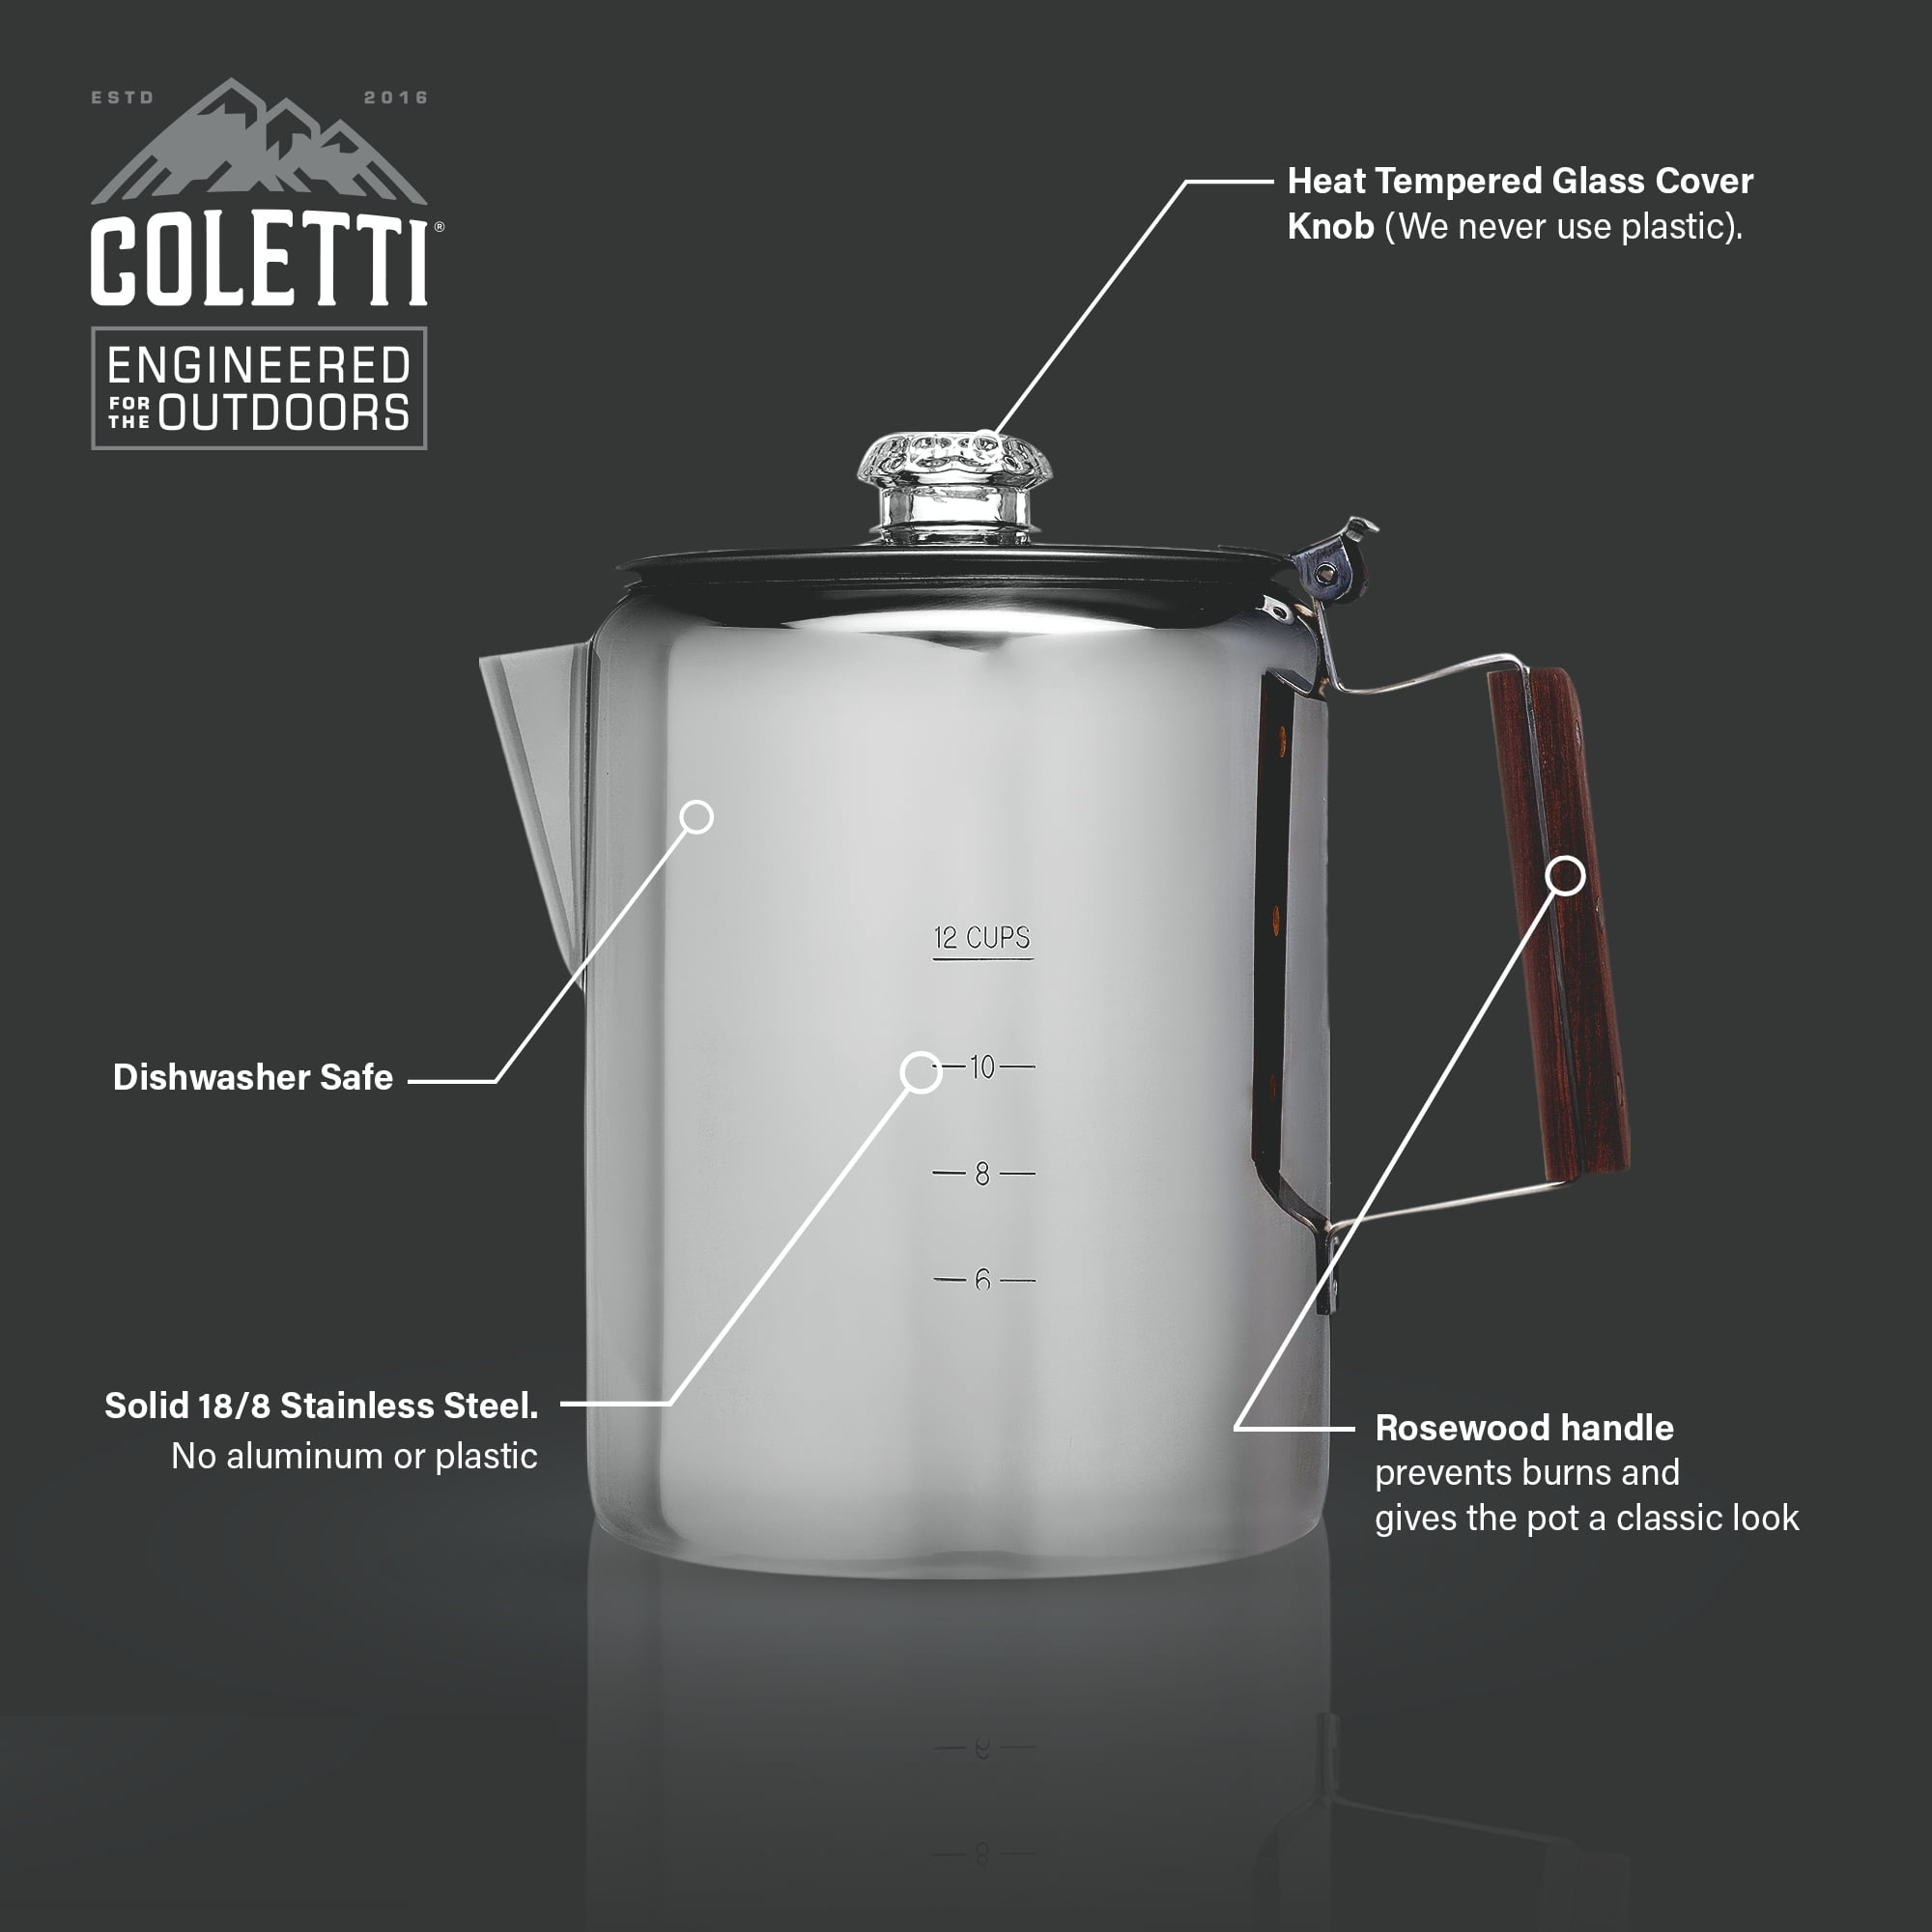 Coletti Bozeman Percolator (9-Cup) Review: I Bought & Tested It